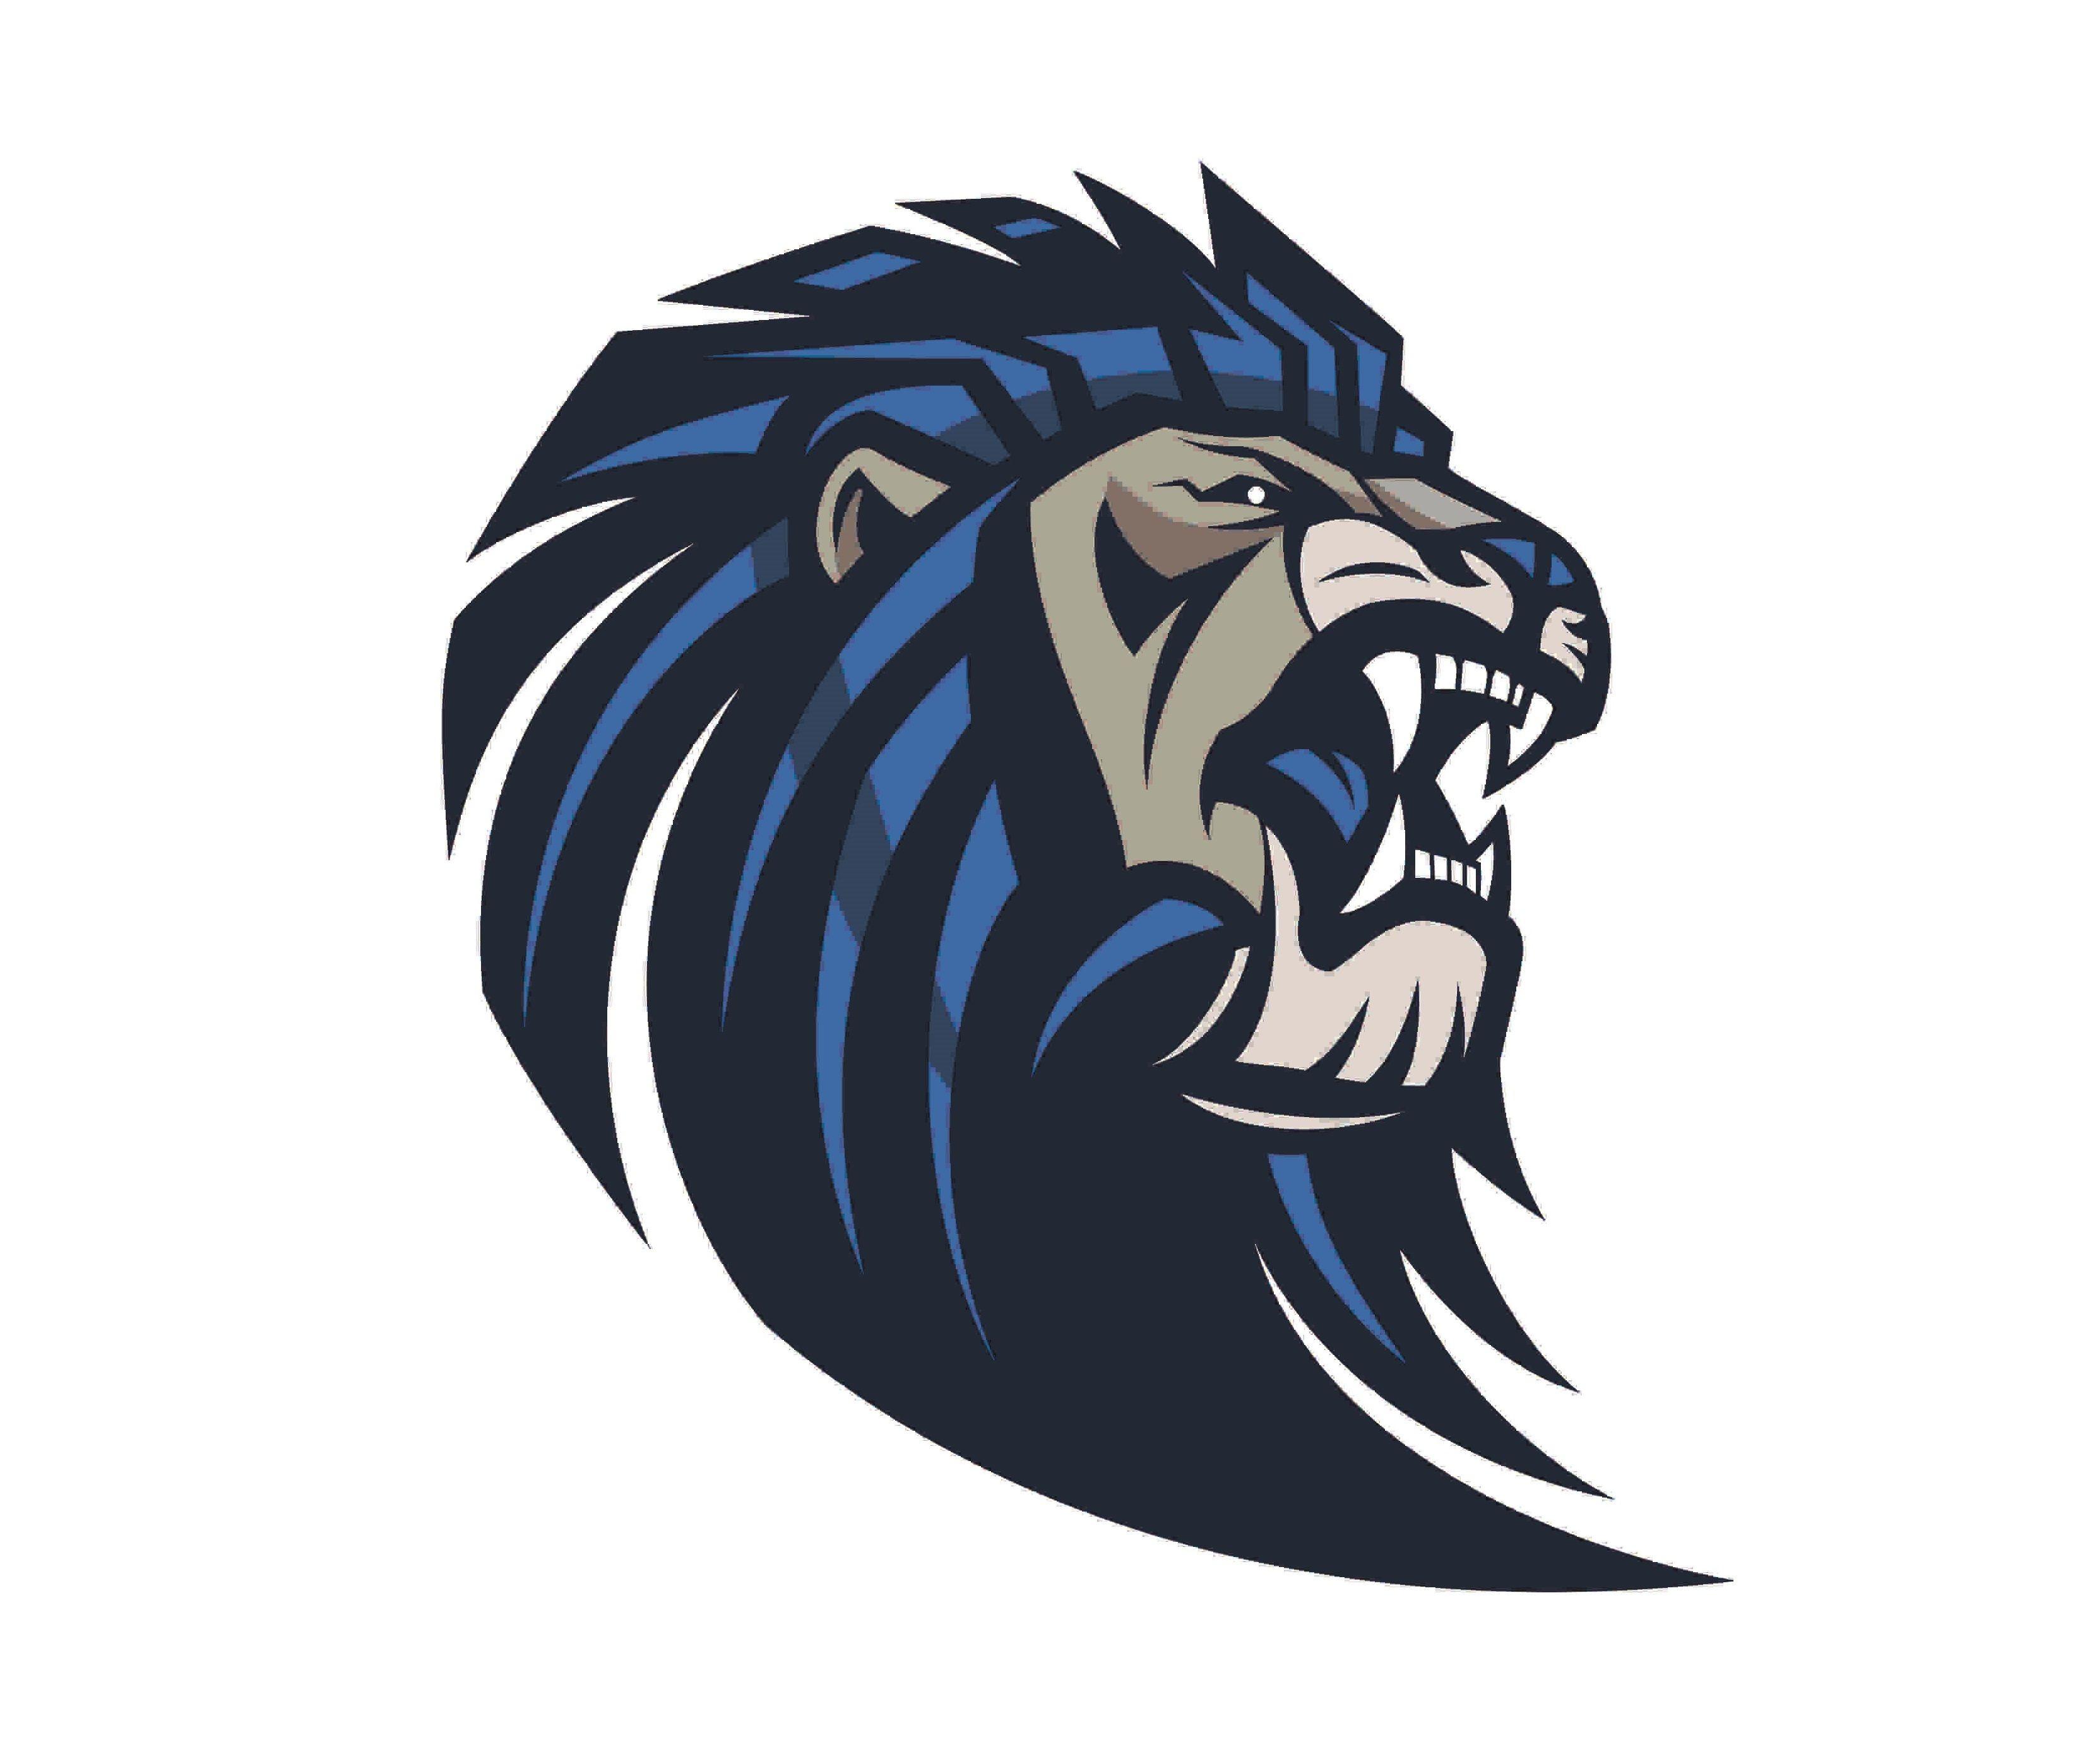 White and Blue Lion Logo - Lyons USD 405 - USD #405 Official Mascot